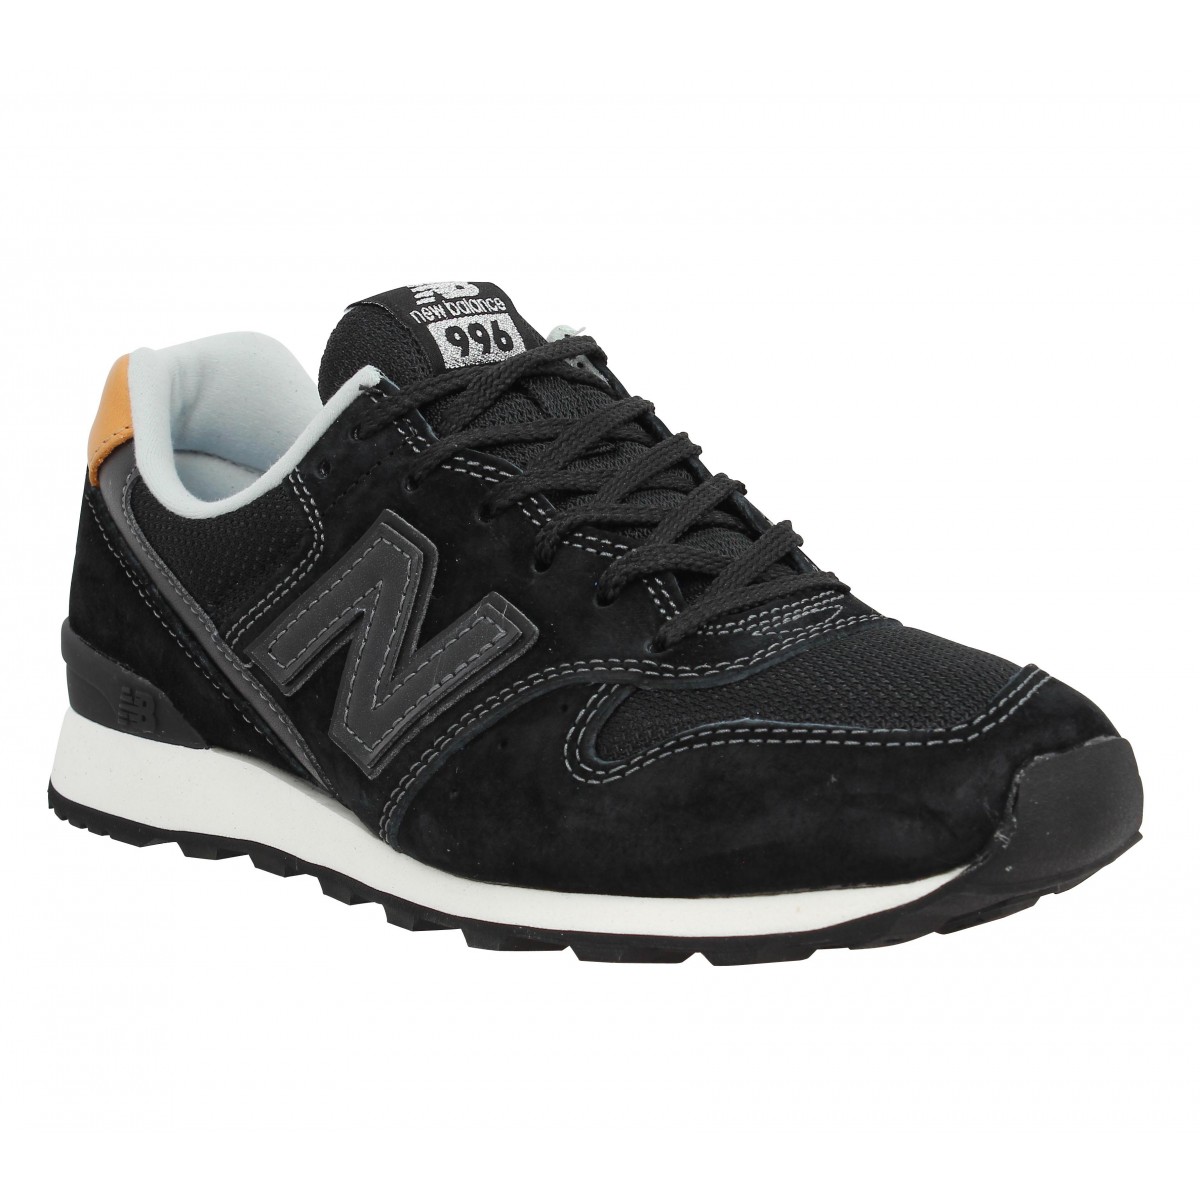 new balance femme taille 35